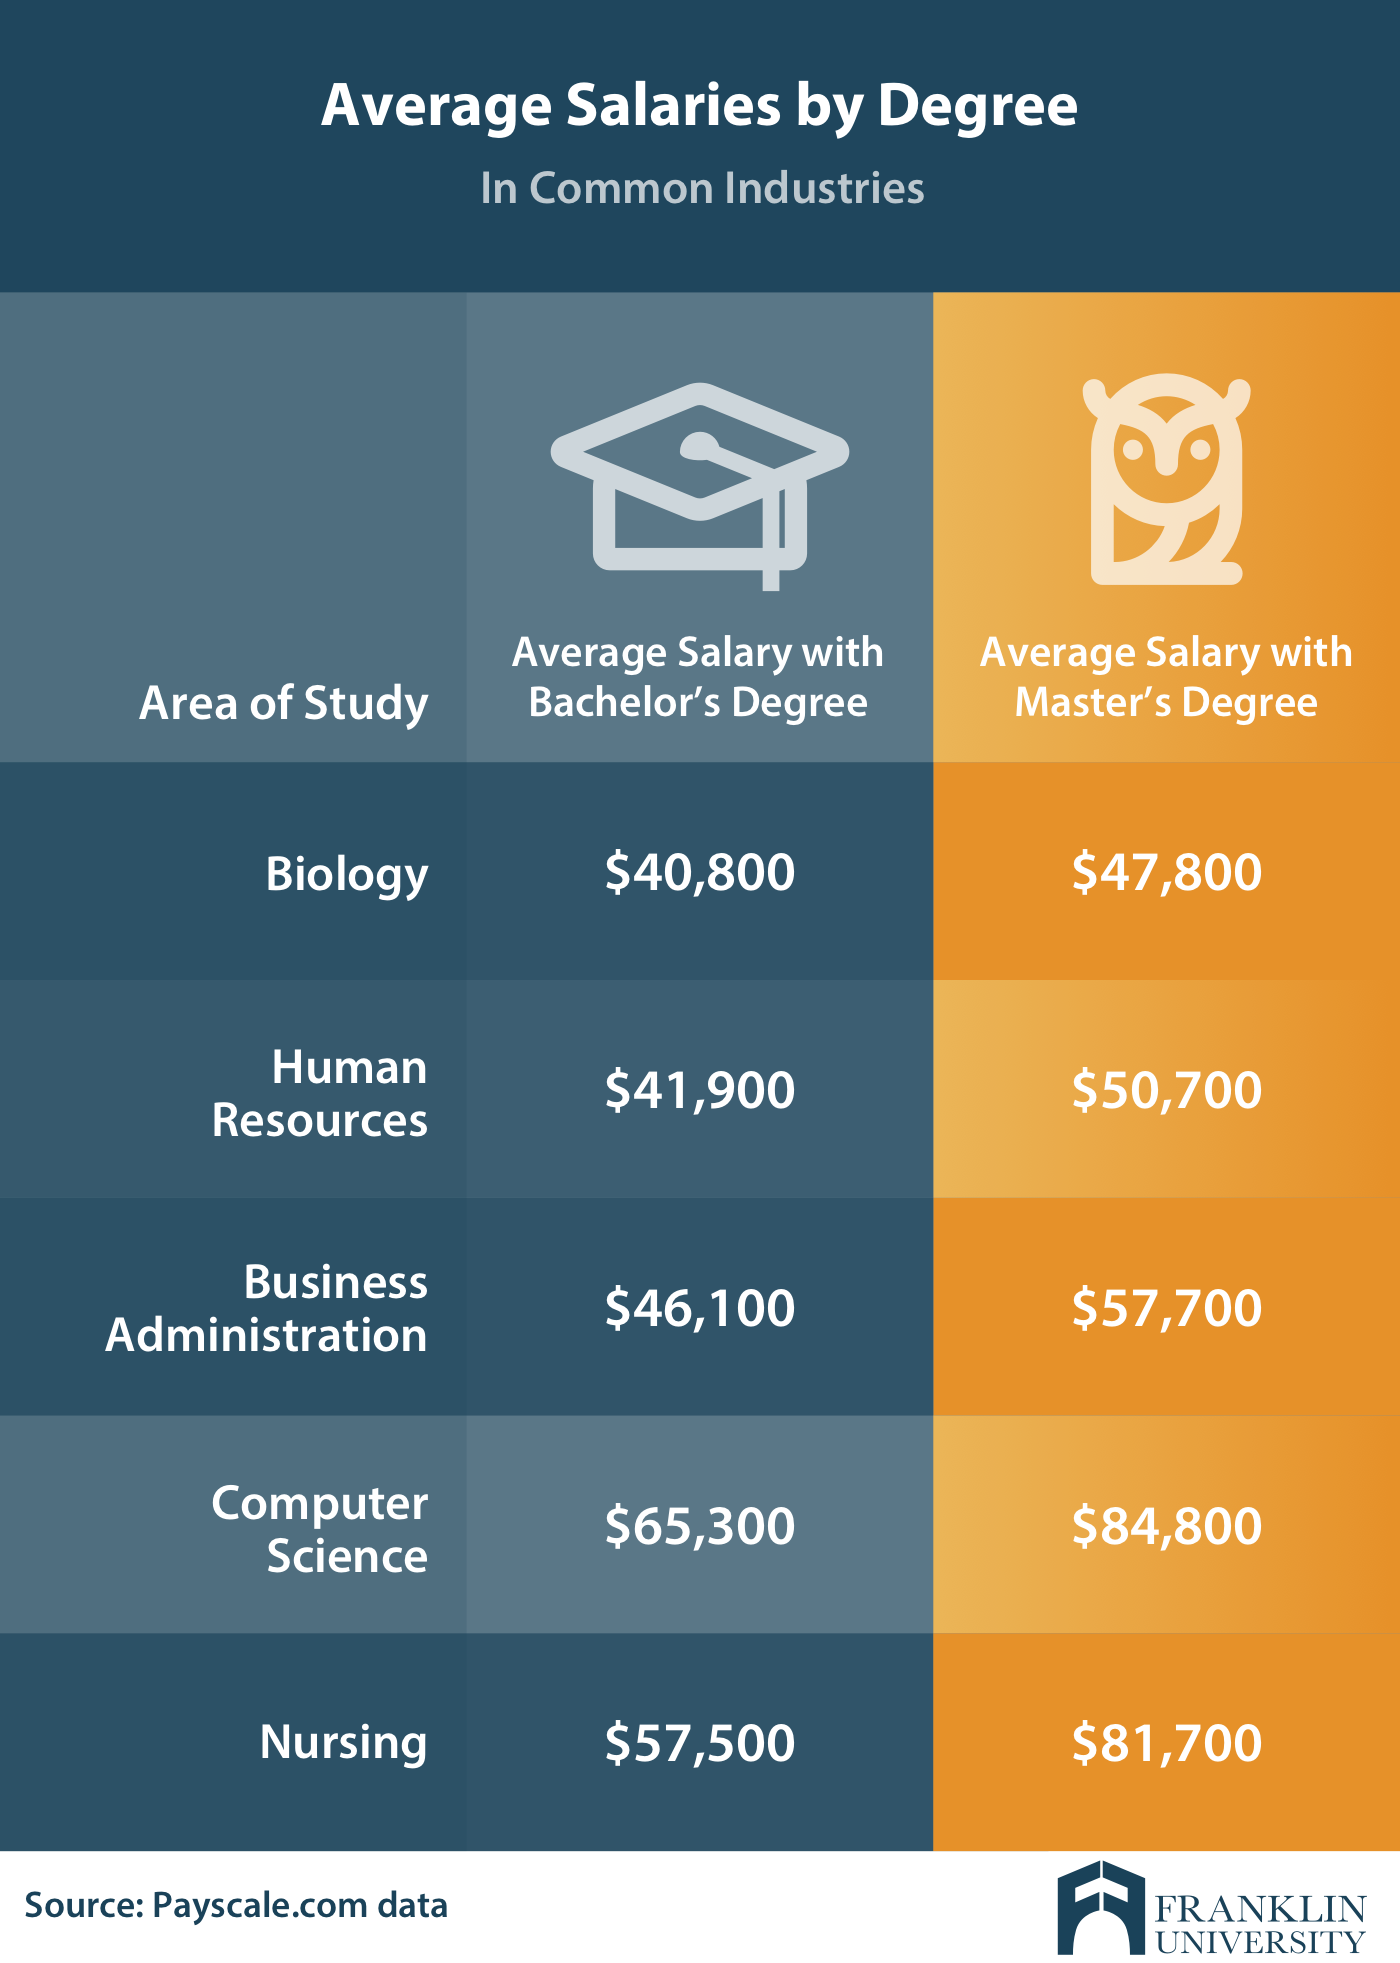 graphic describes the average salaries by degree in common industries